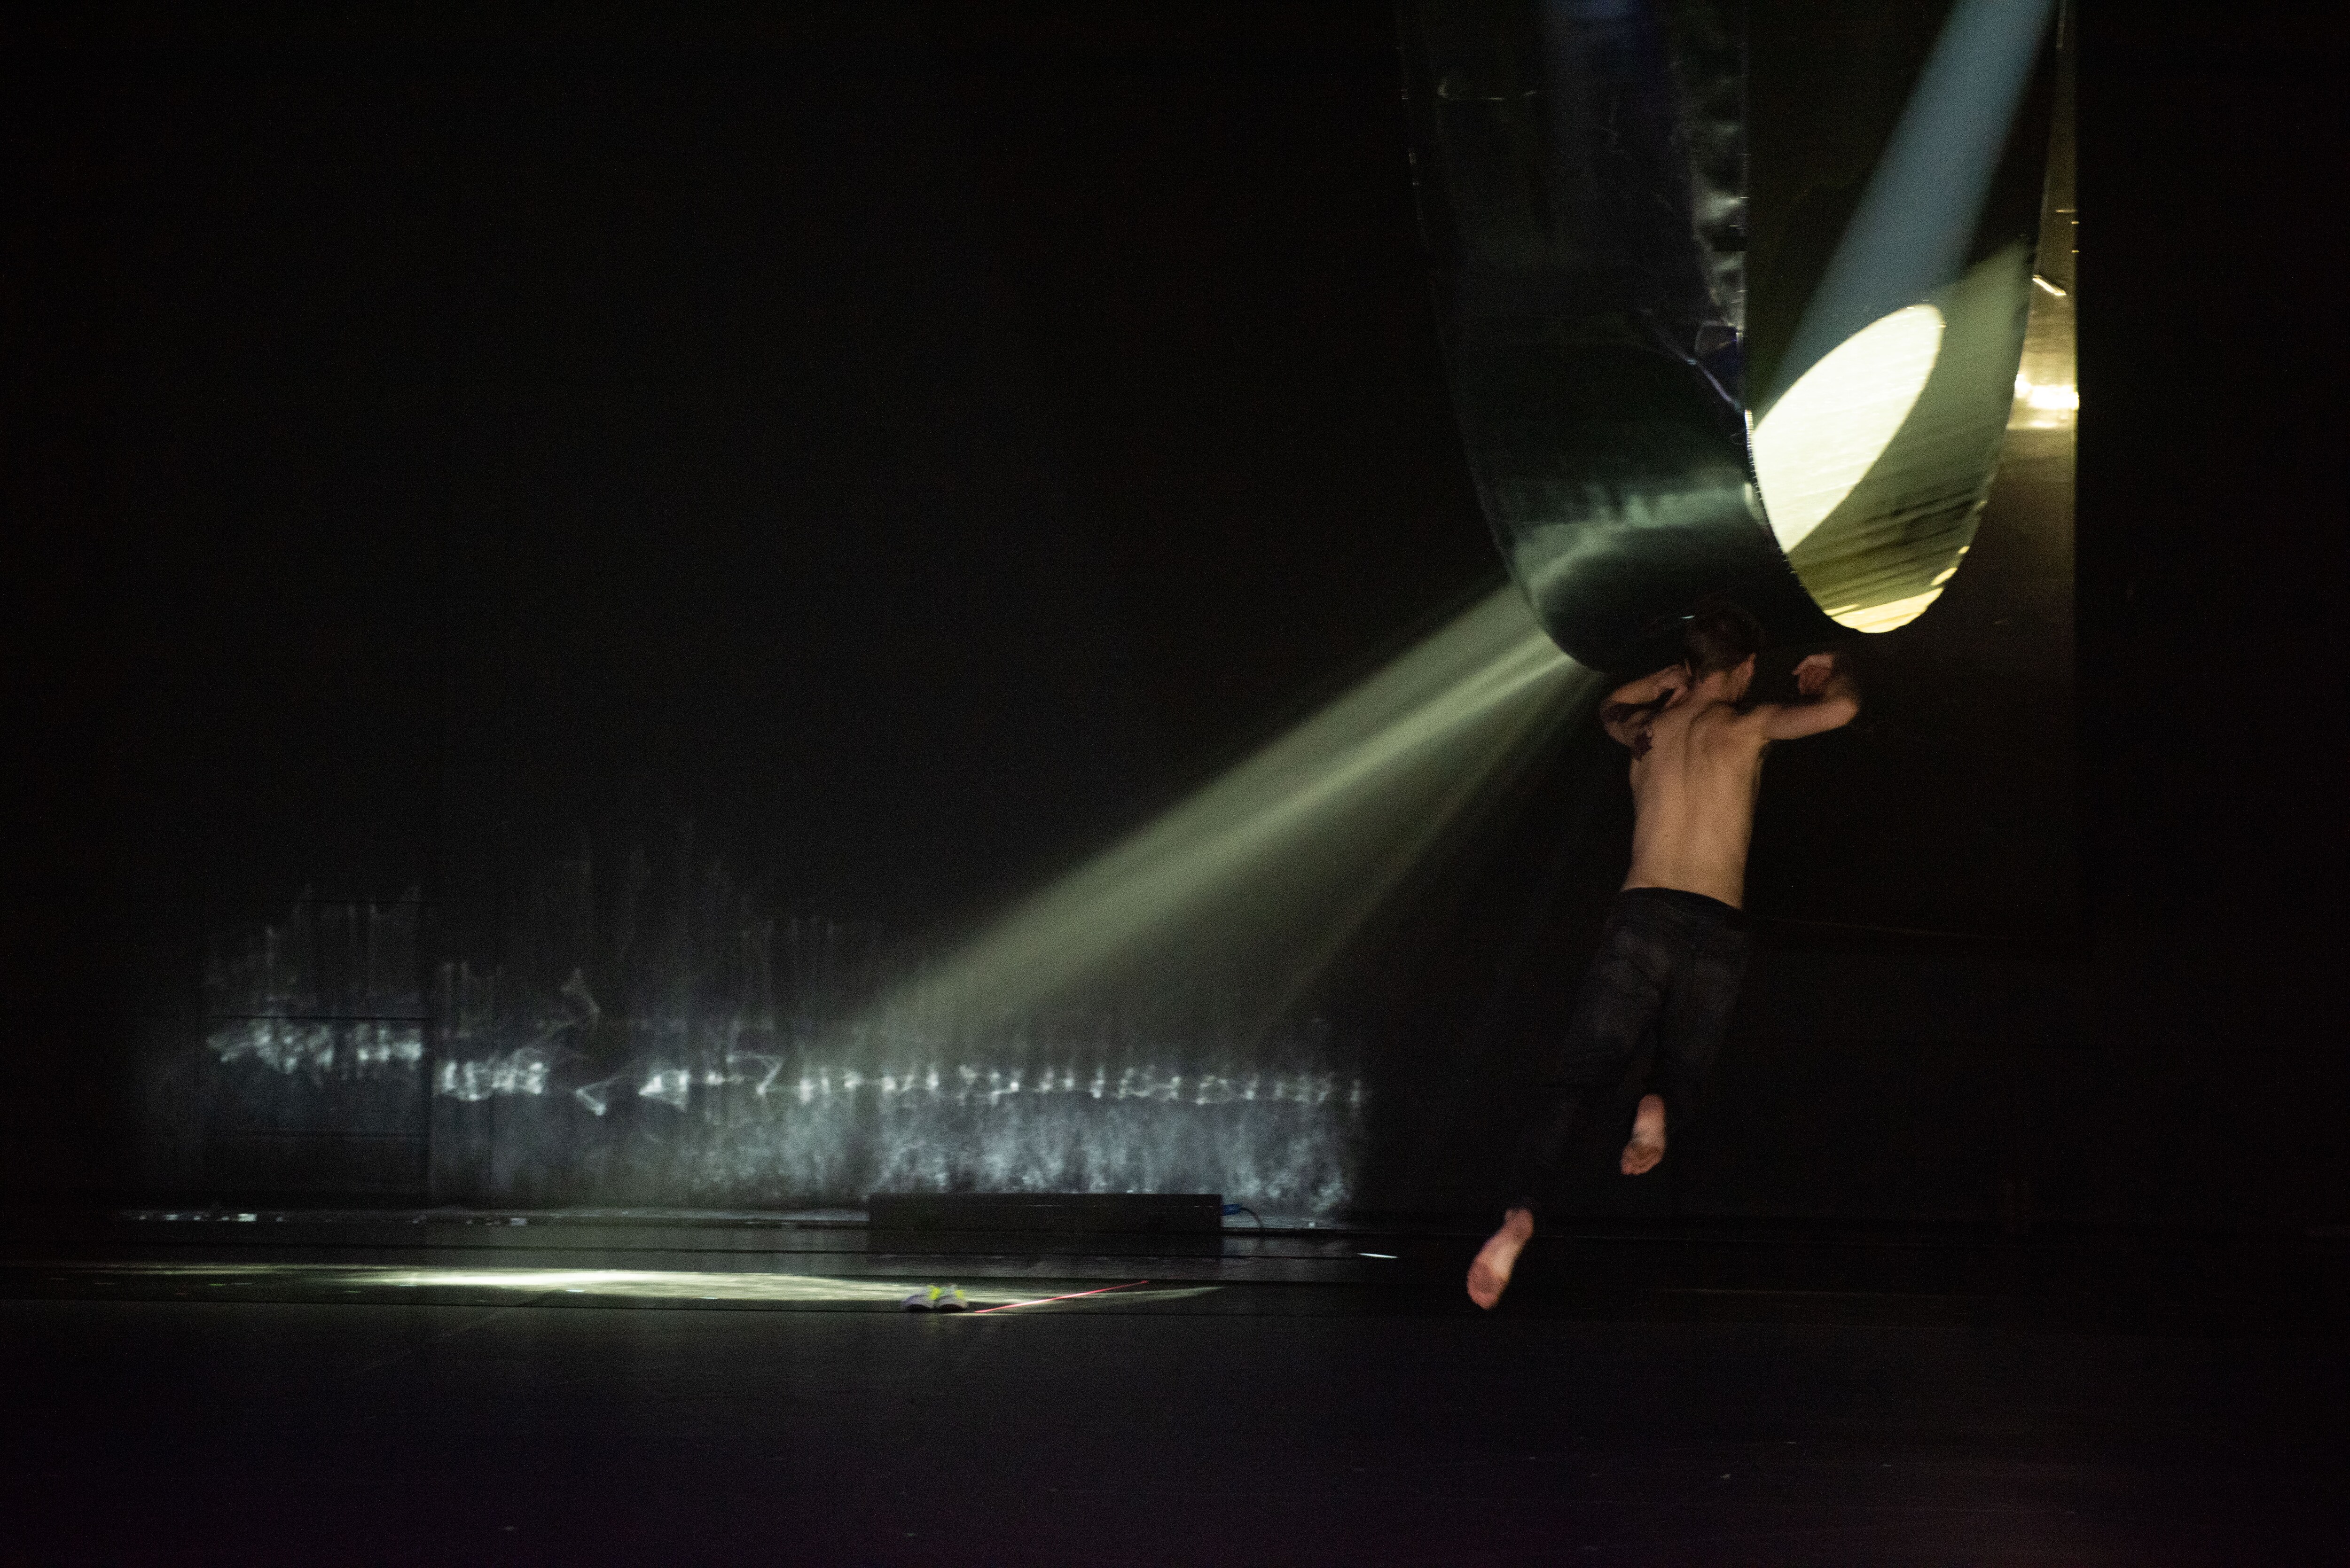 A dancer jumping in front of a structure diffusing a ray of light on a dark stage